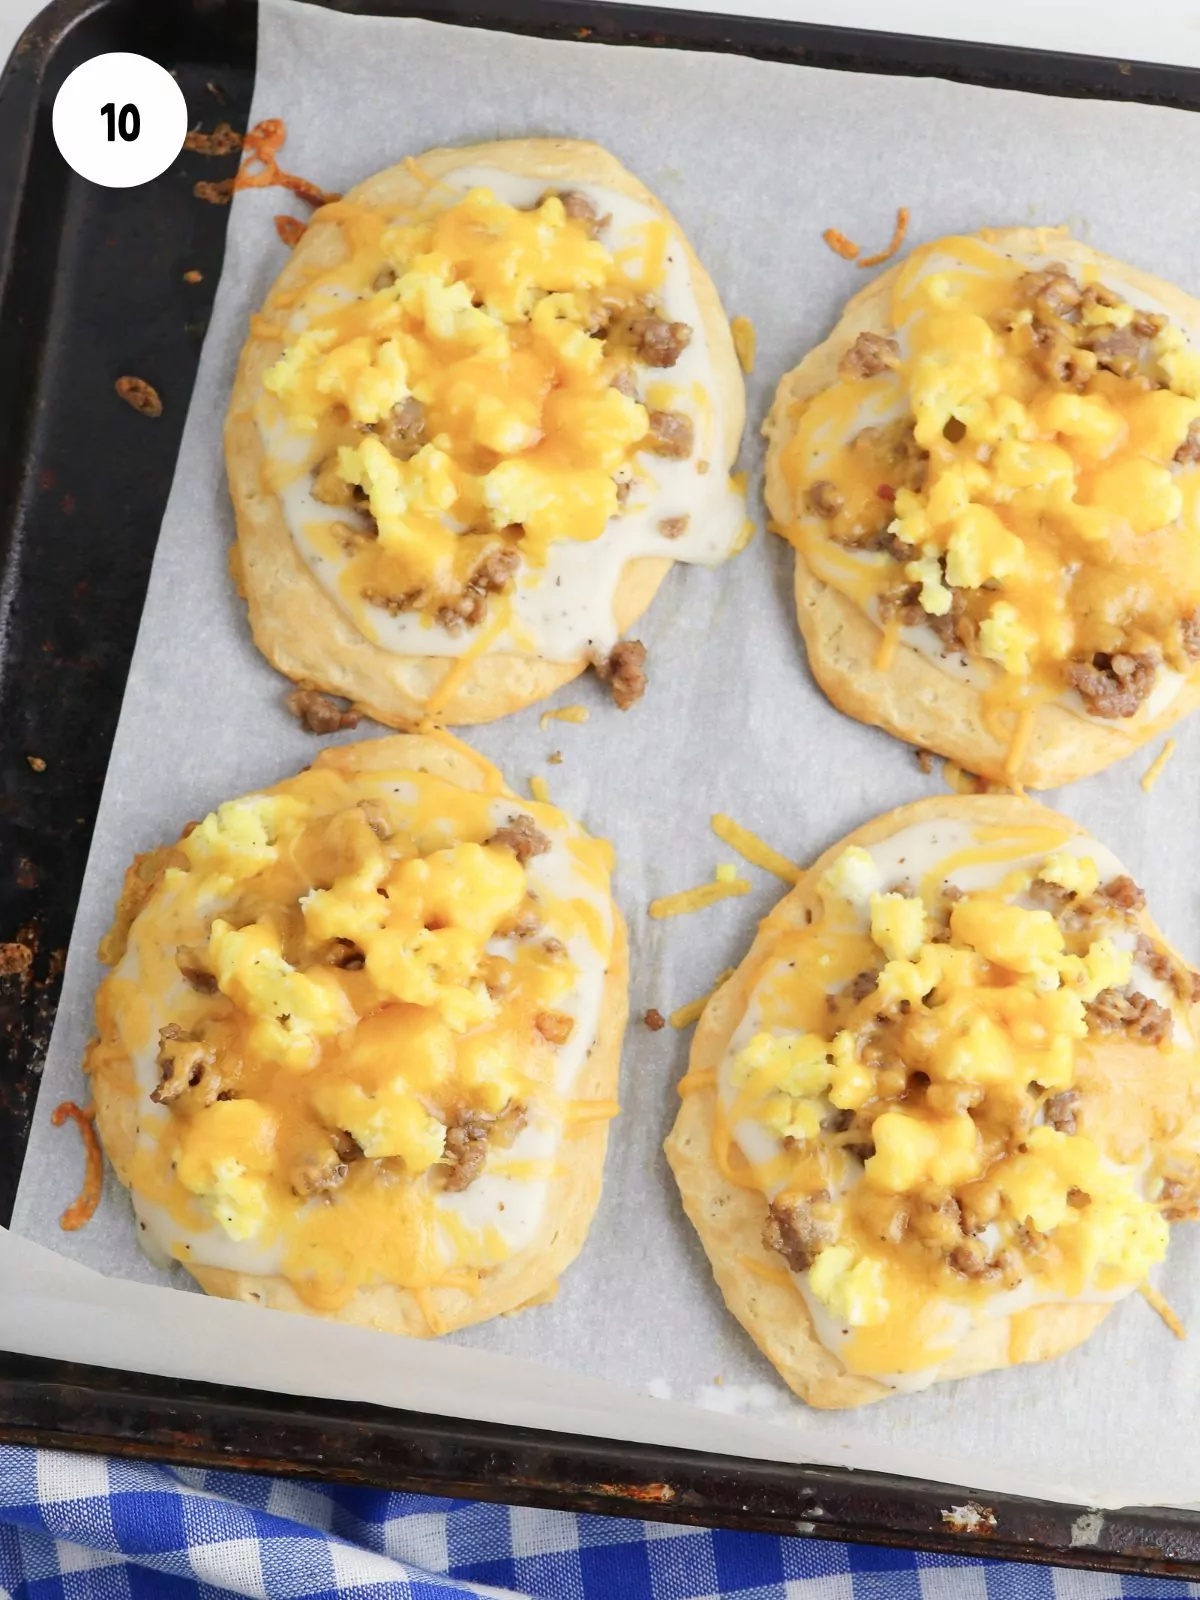 melted cheese on the breakfast pizzas